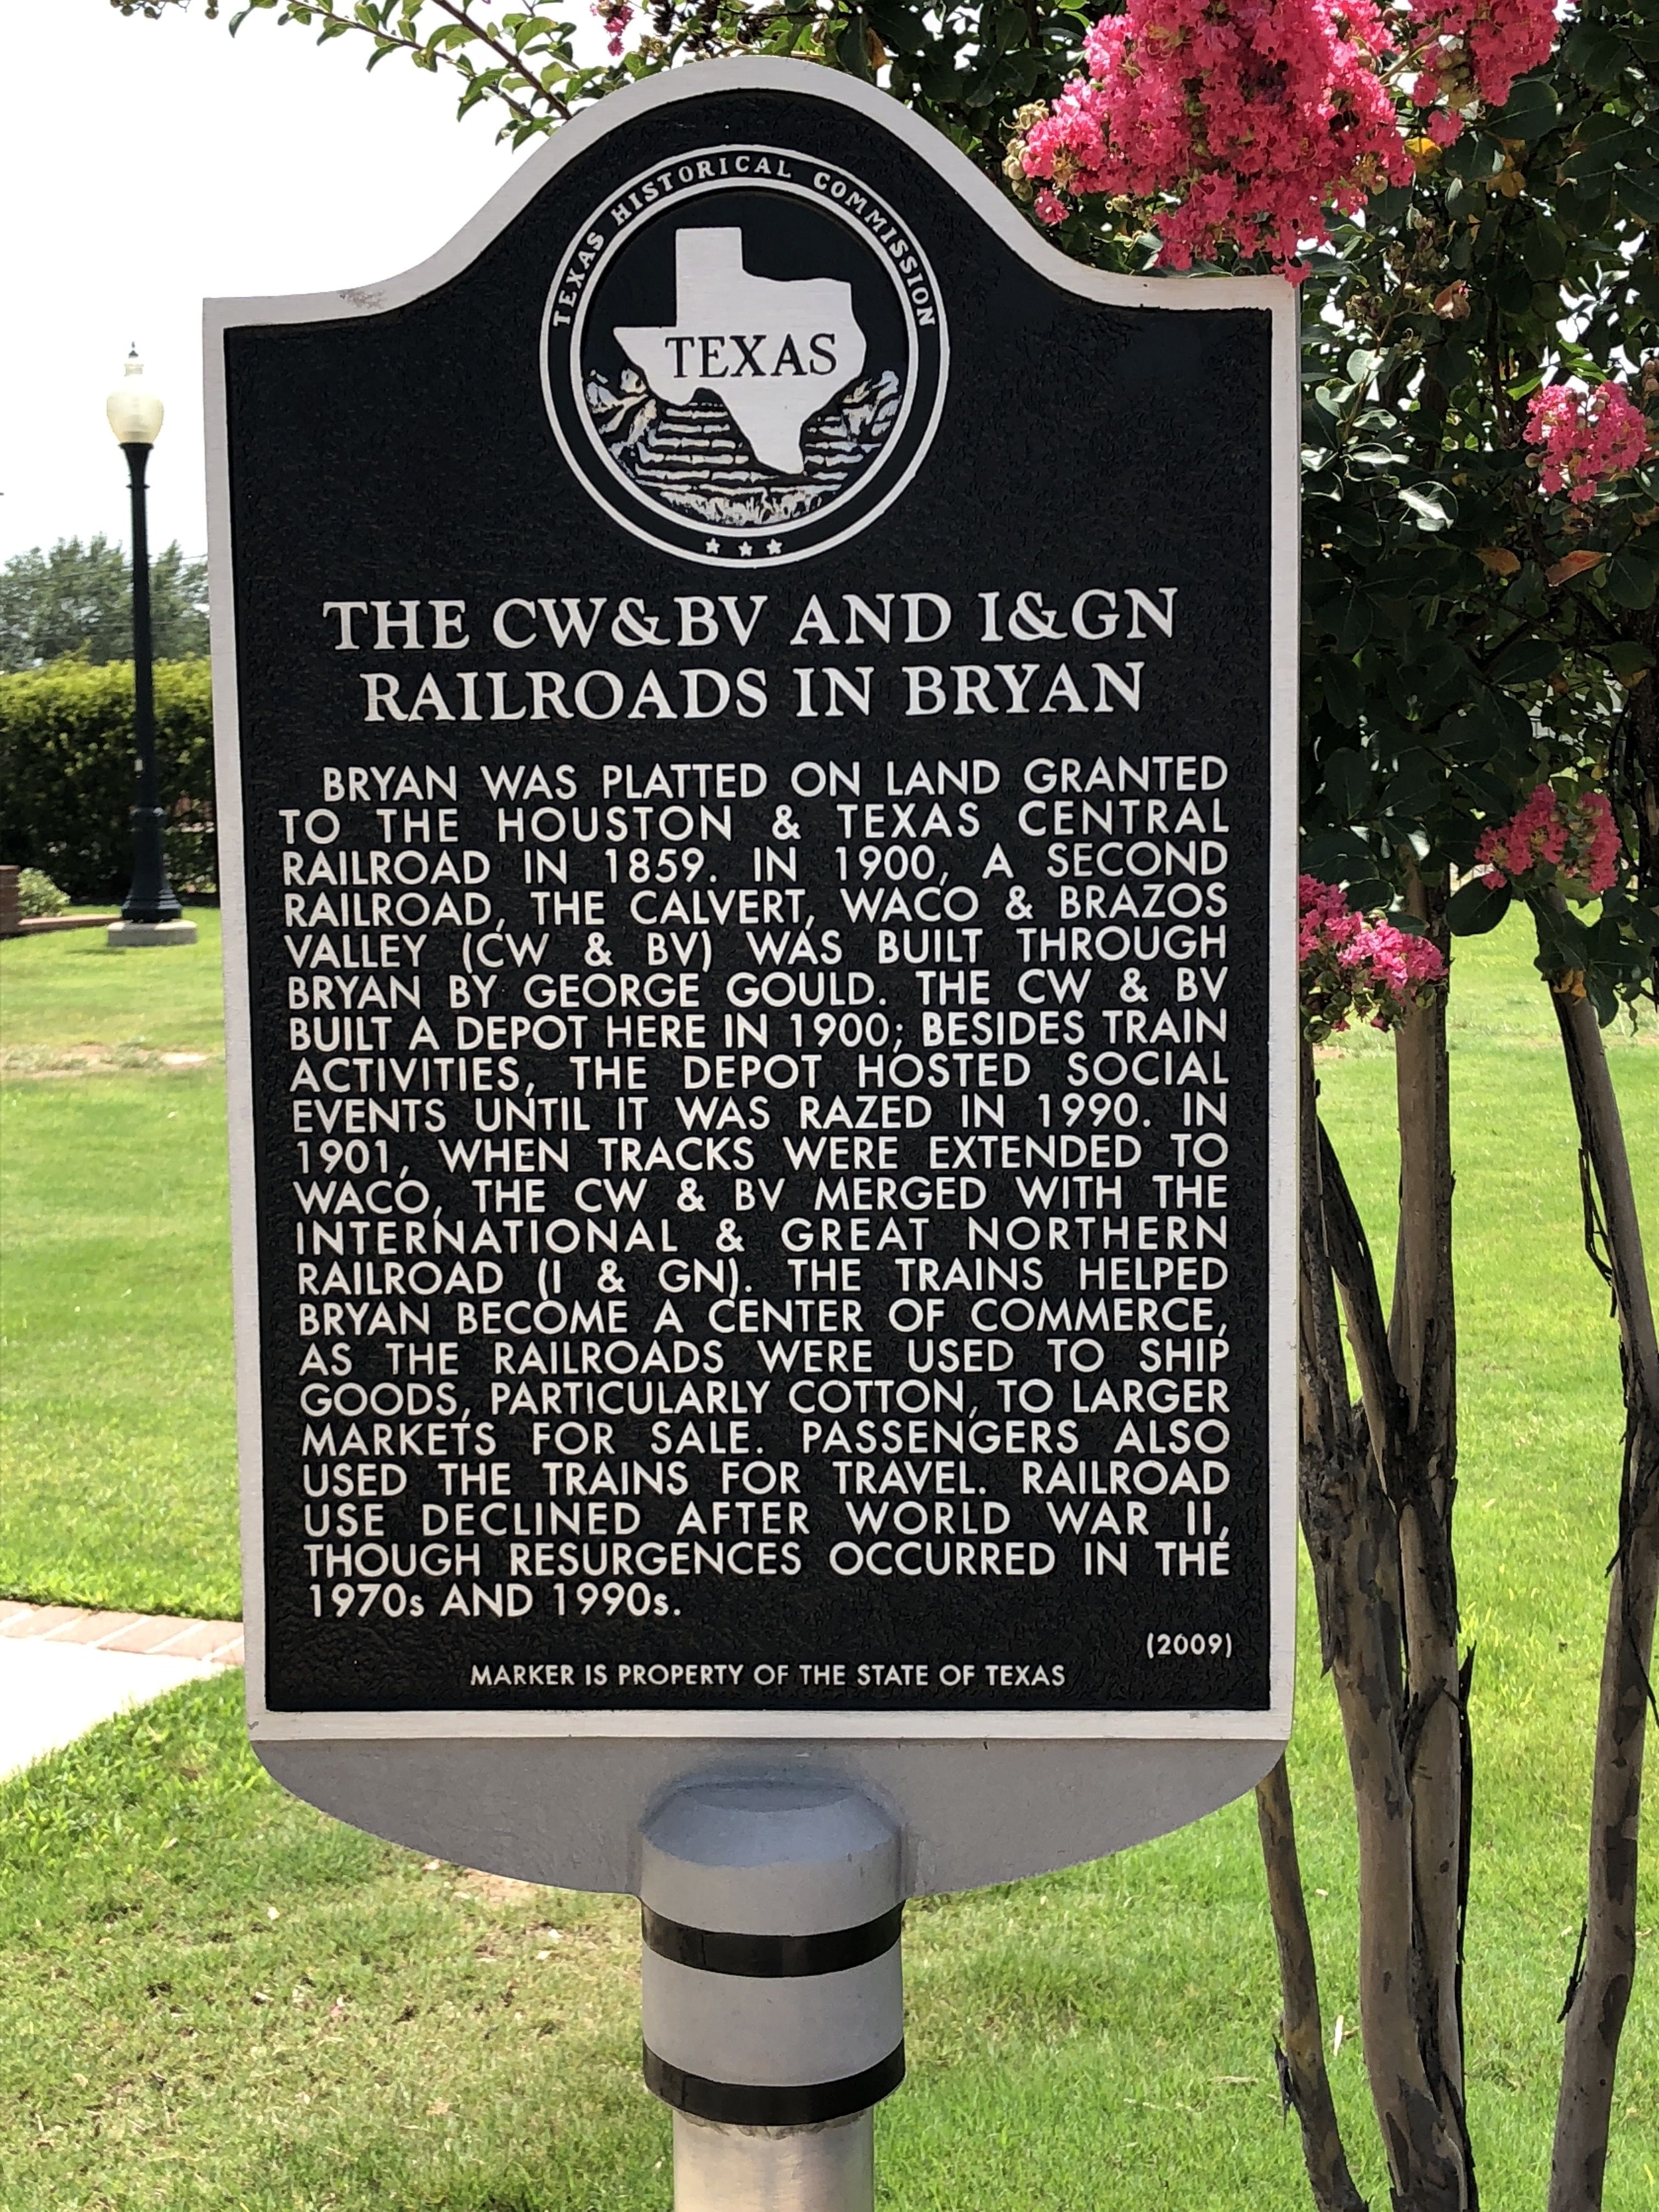 The CW&BV and I&GN Railroads in Bryan Marker